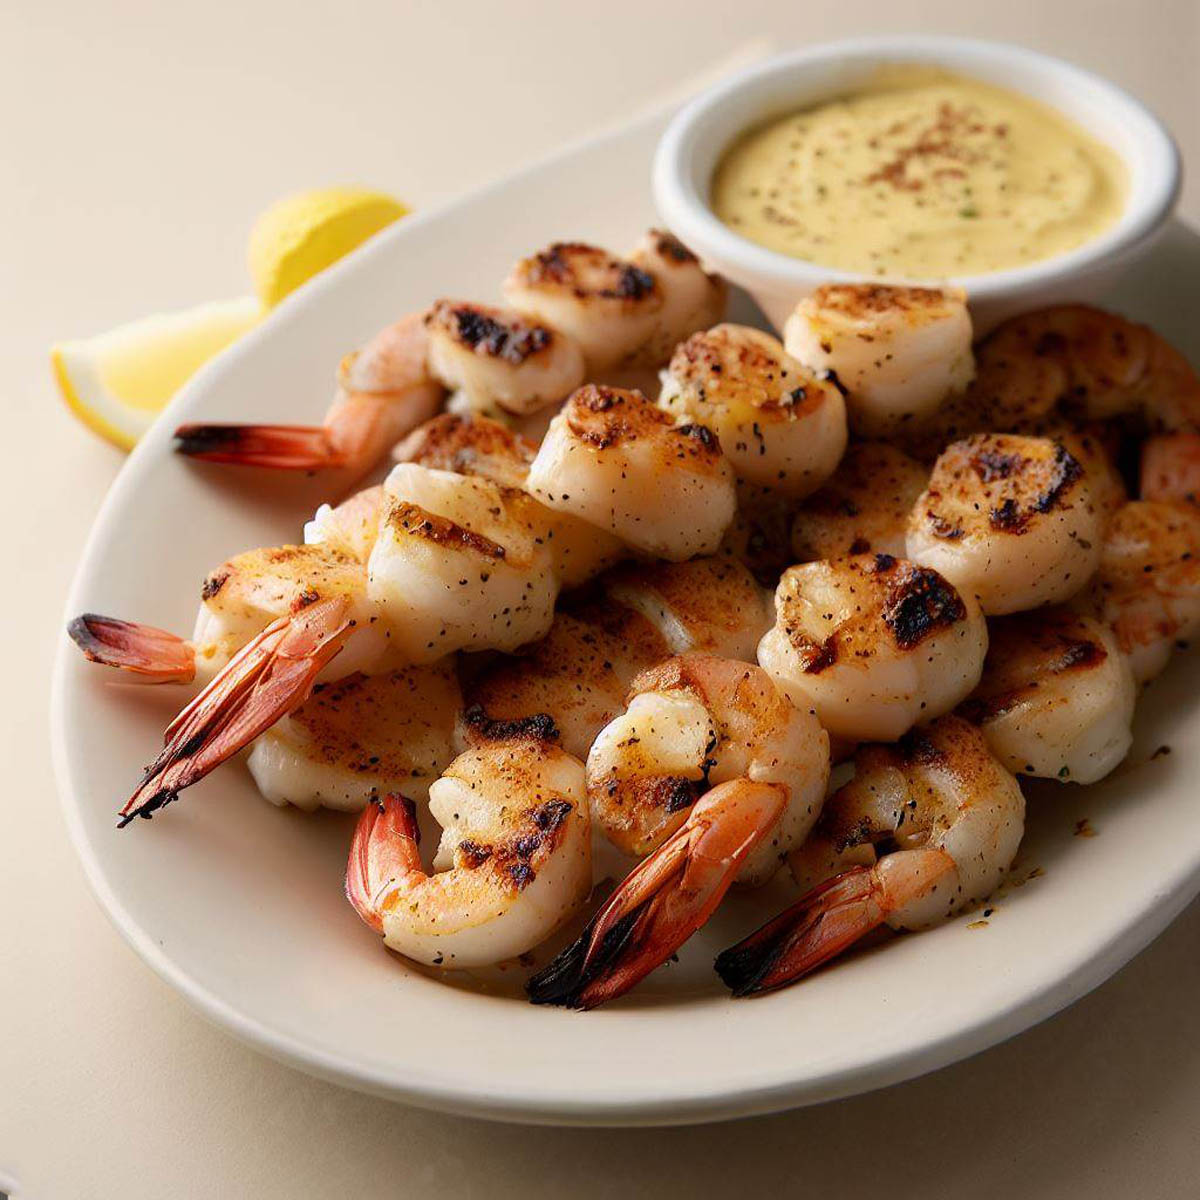 Plate of Texas Roadhouse grilled shrimp skewers with a side of lemon pepper butter